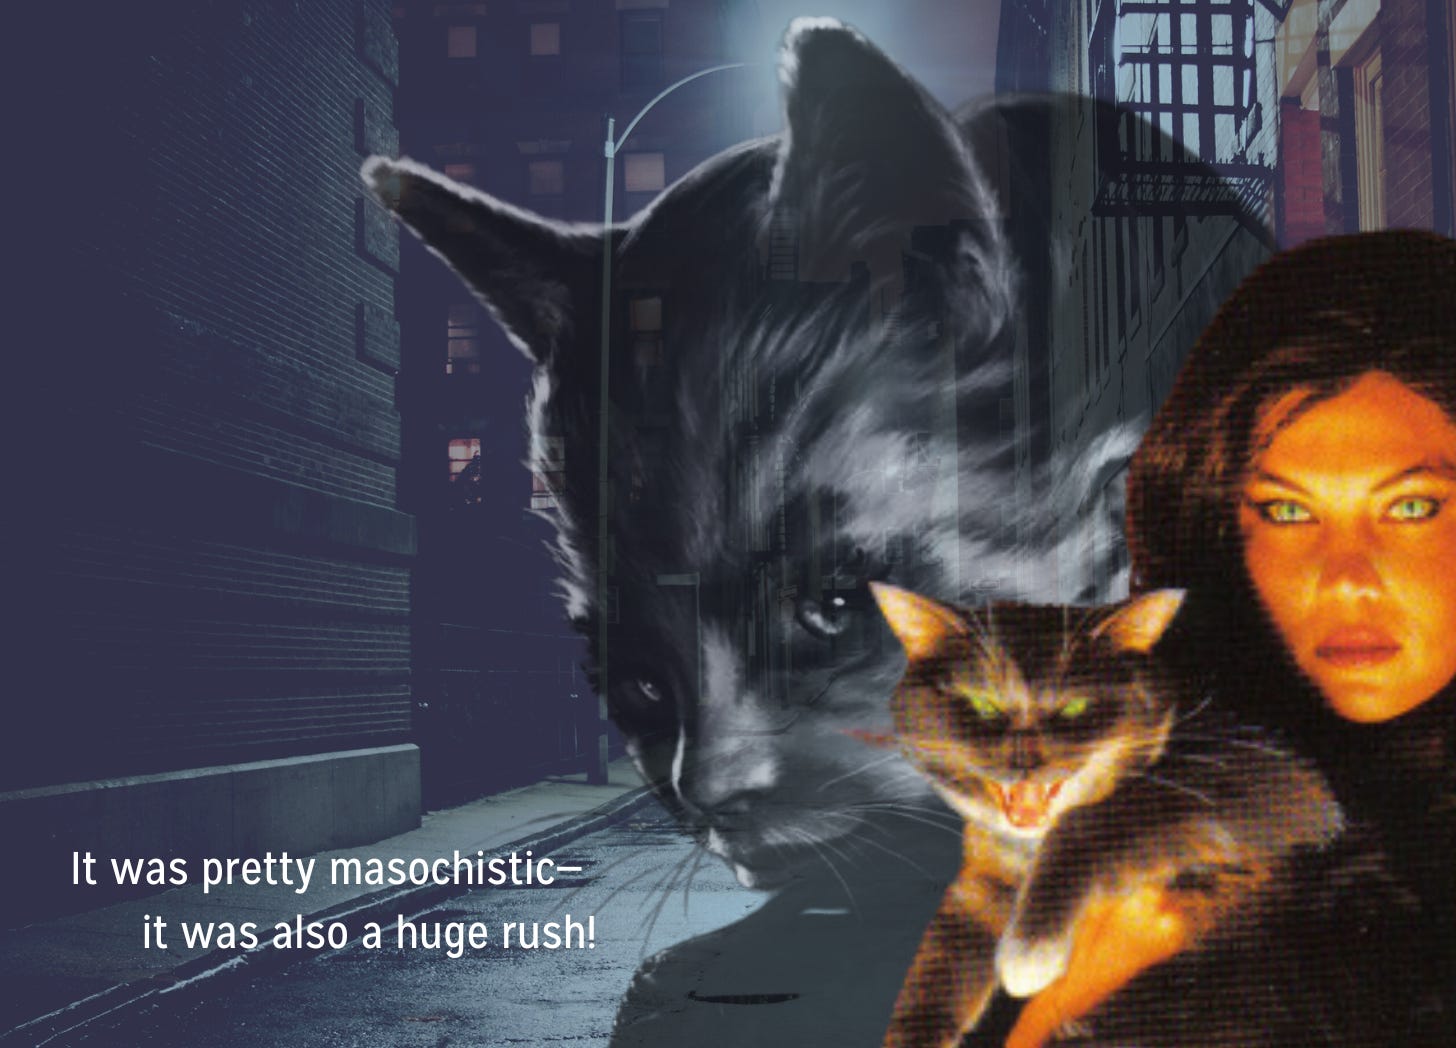 A gray city street in the background, with a faded cat woman cut out overlaid. In color at the foreground, a woman with cat eyes holds a yowling cat. White text in the bottom left reads "It was pretty masochistic-it was also a huge rush!"